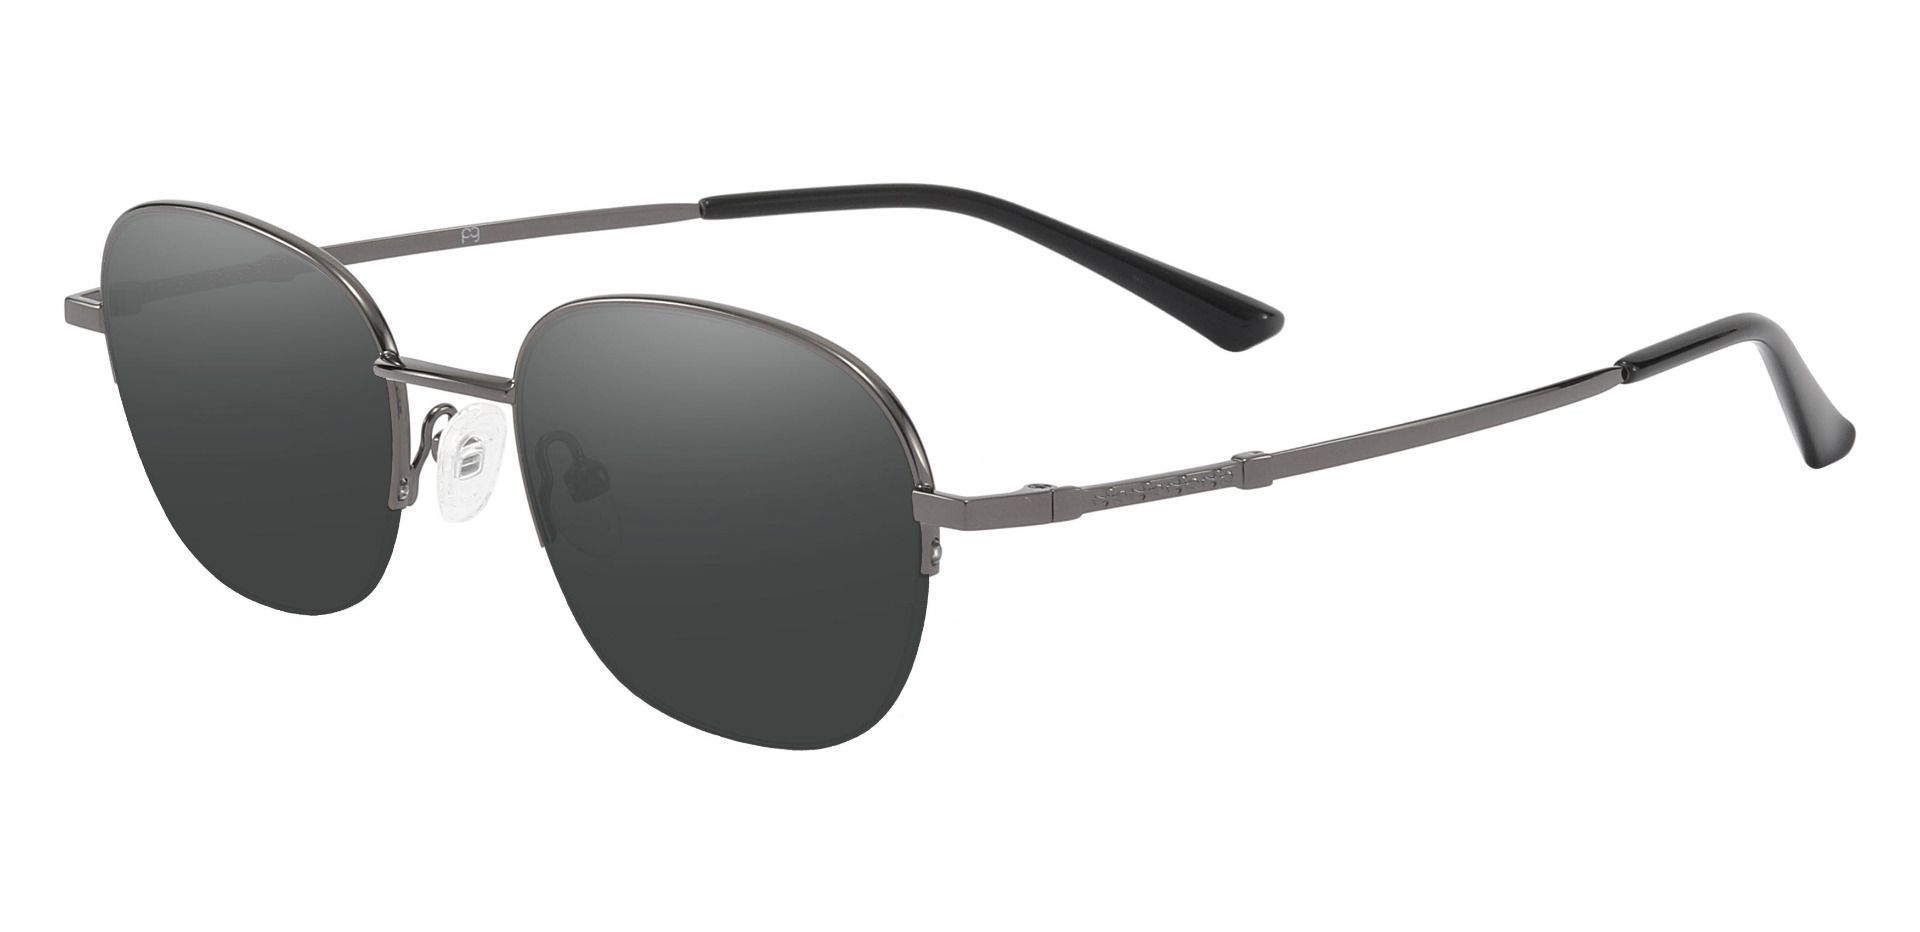 Rochester Oval Lined Bifocal Sunglasses - Gray Frame With Gray Lenses